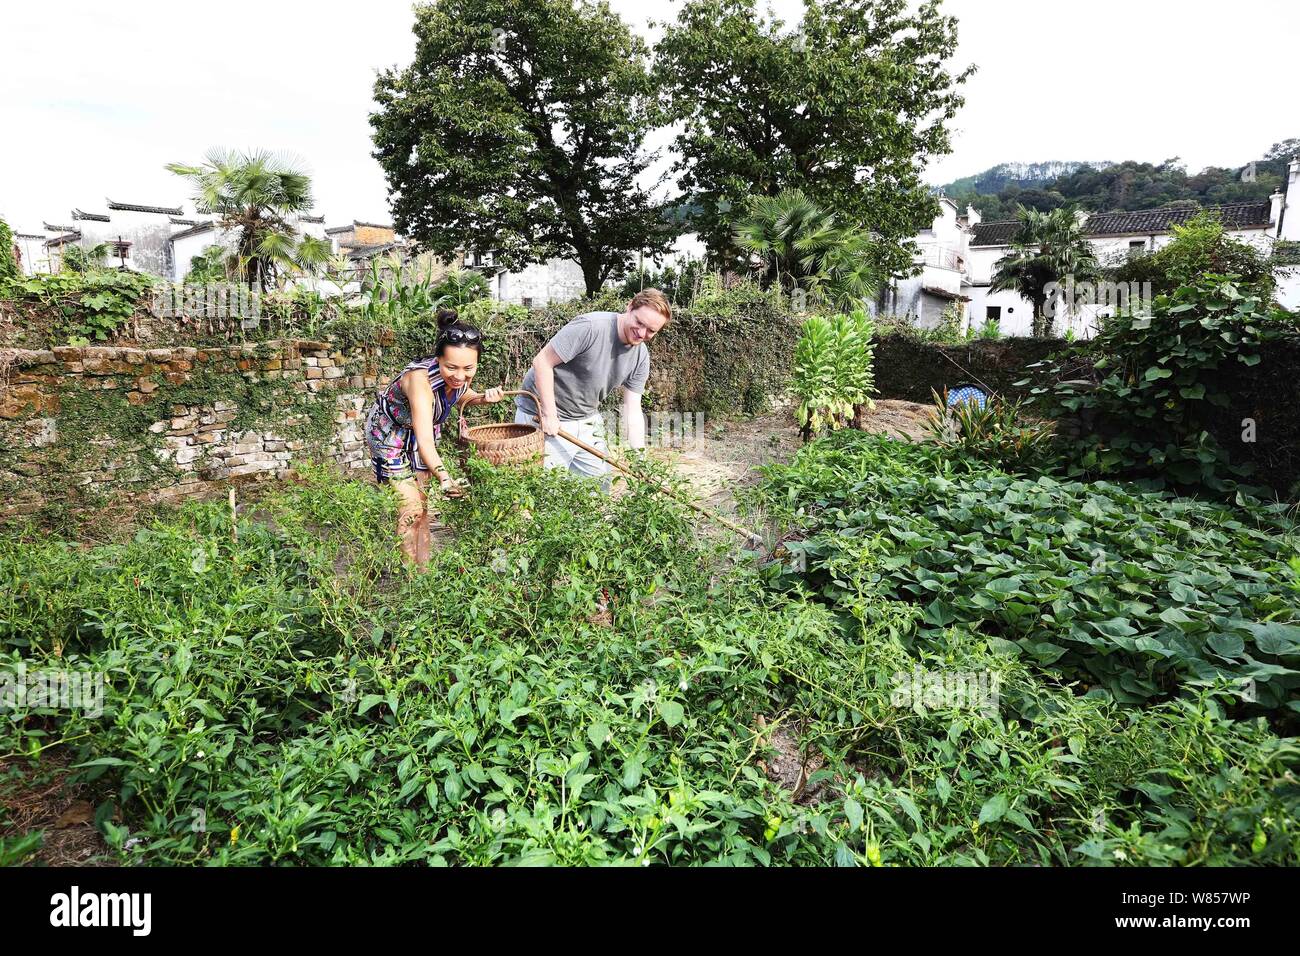 British man Edward Gawne, right, and his Chinese fiancee Liao Minxin work in their vegetable garden in Sixi Village, Wuyuan county, Shangrao city, eas Stock Photo